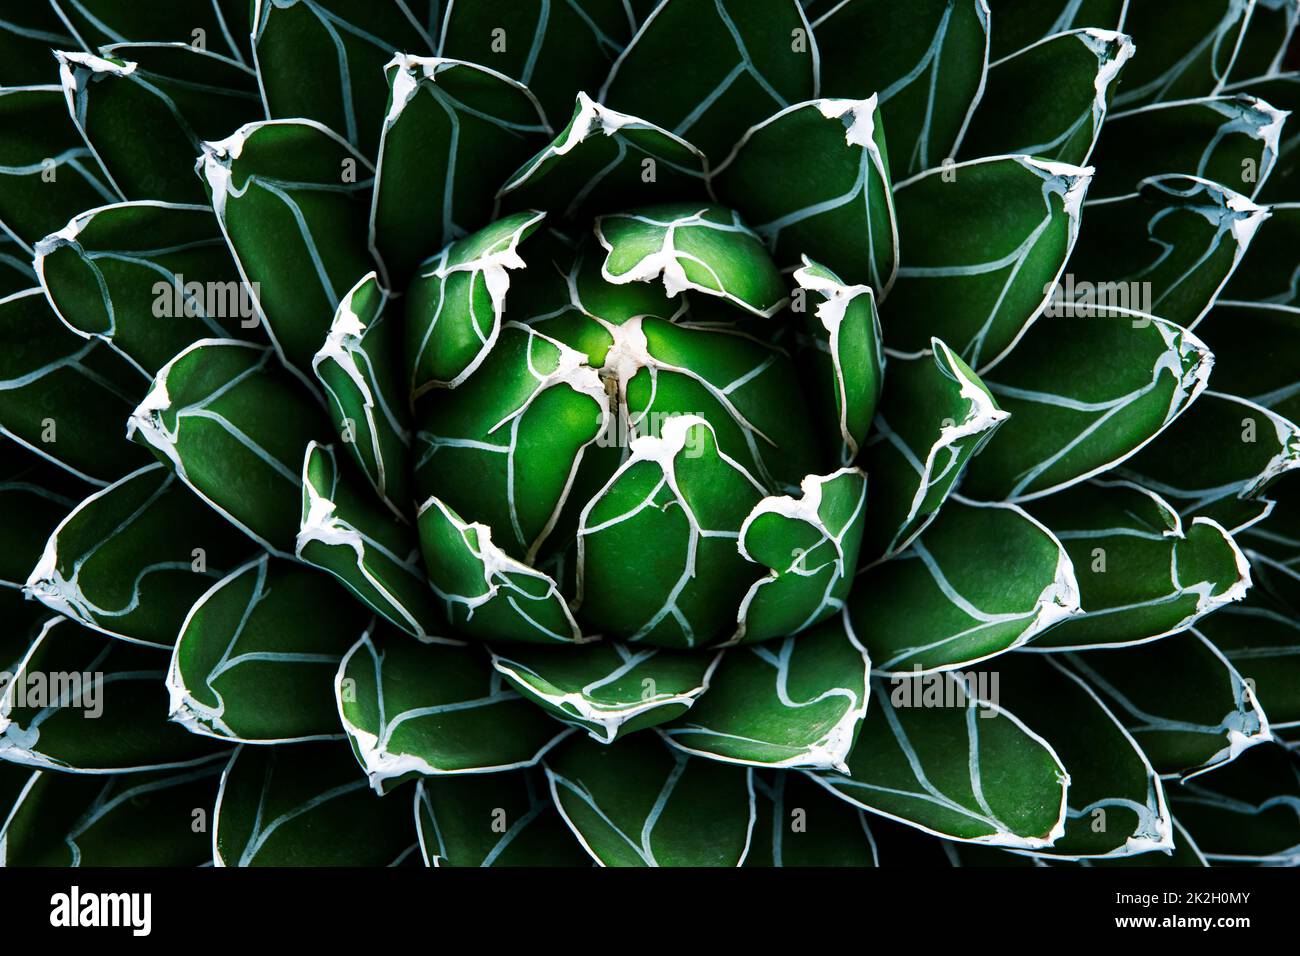 beautiful abstract top view of agave plant Stock Photo